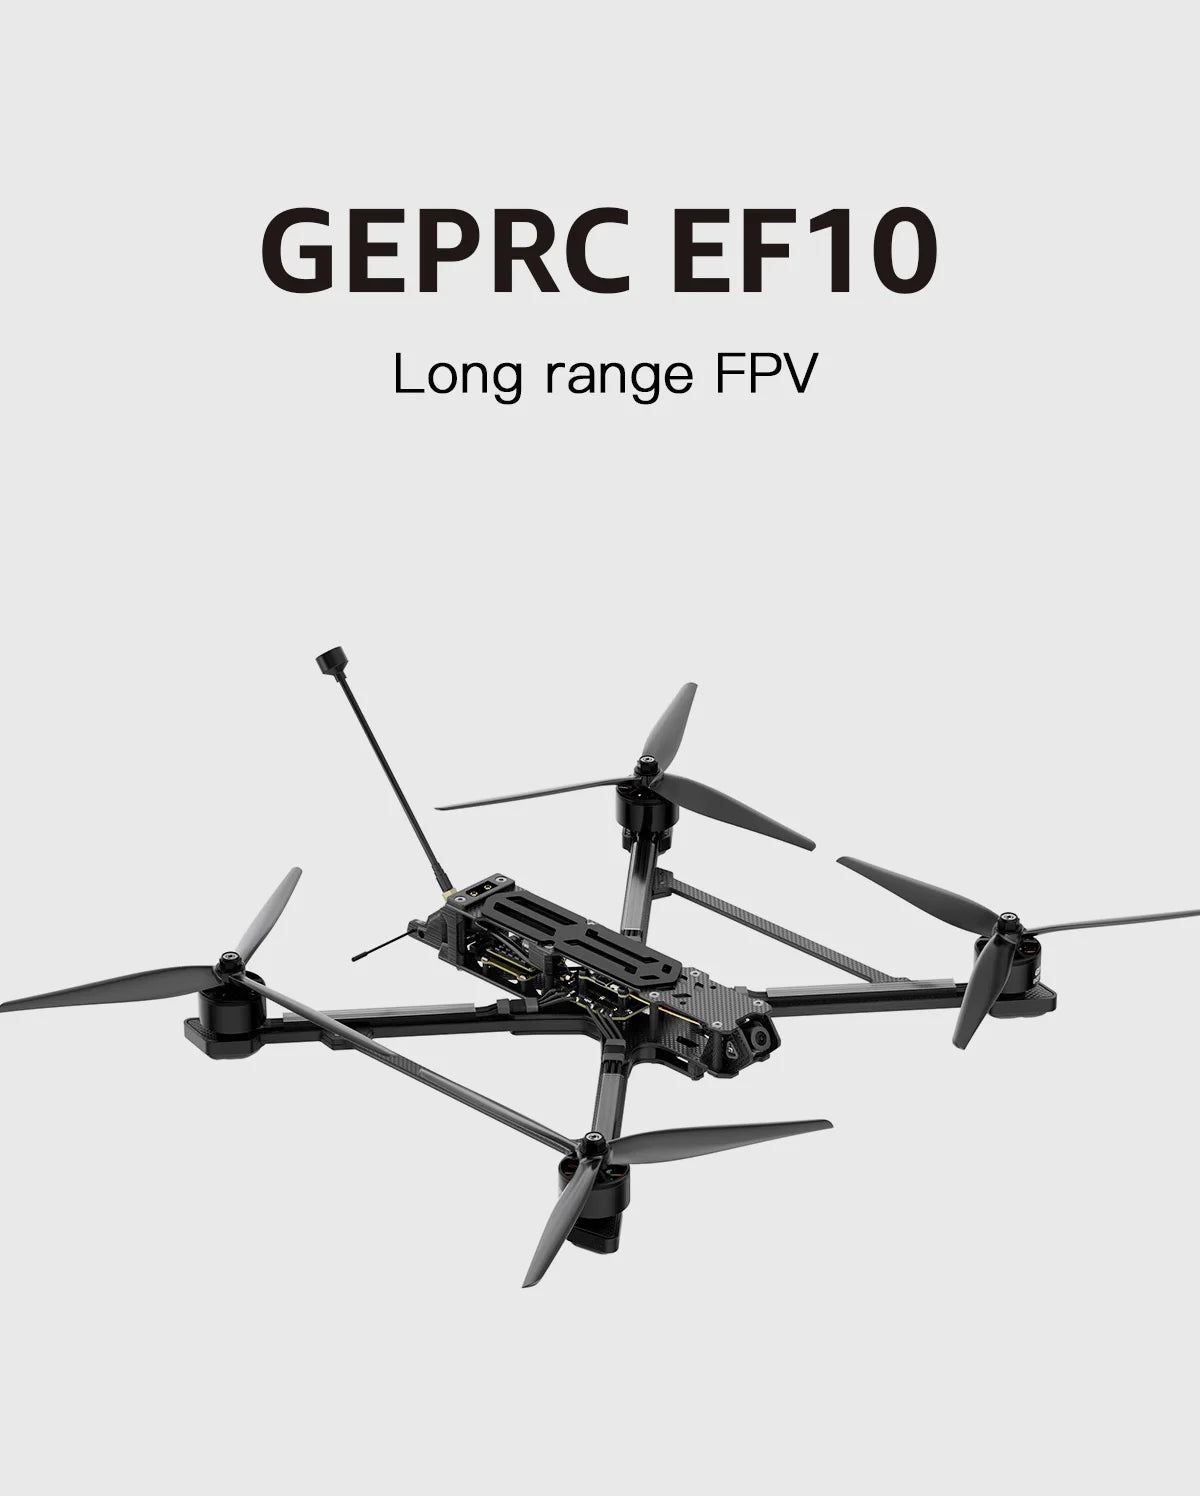 GEPRC EF10 5.8G 2.5W Long Range FPV, damage caused by operating the unit with a low charge or defective battery of any form